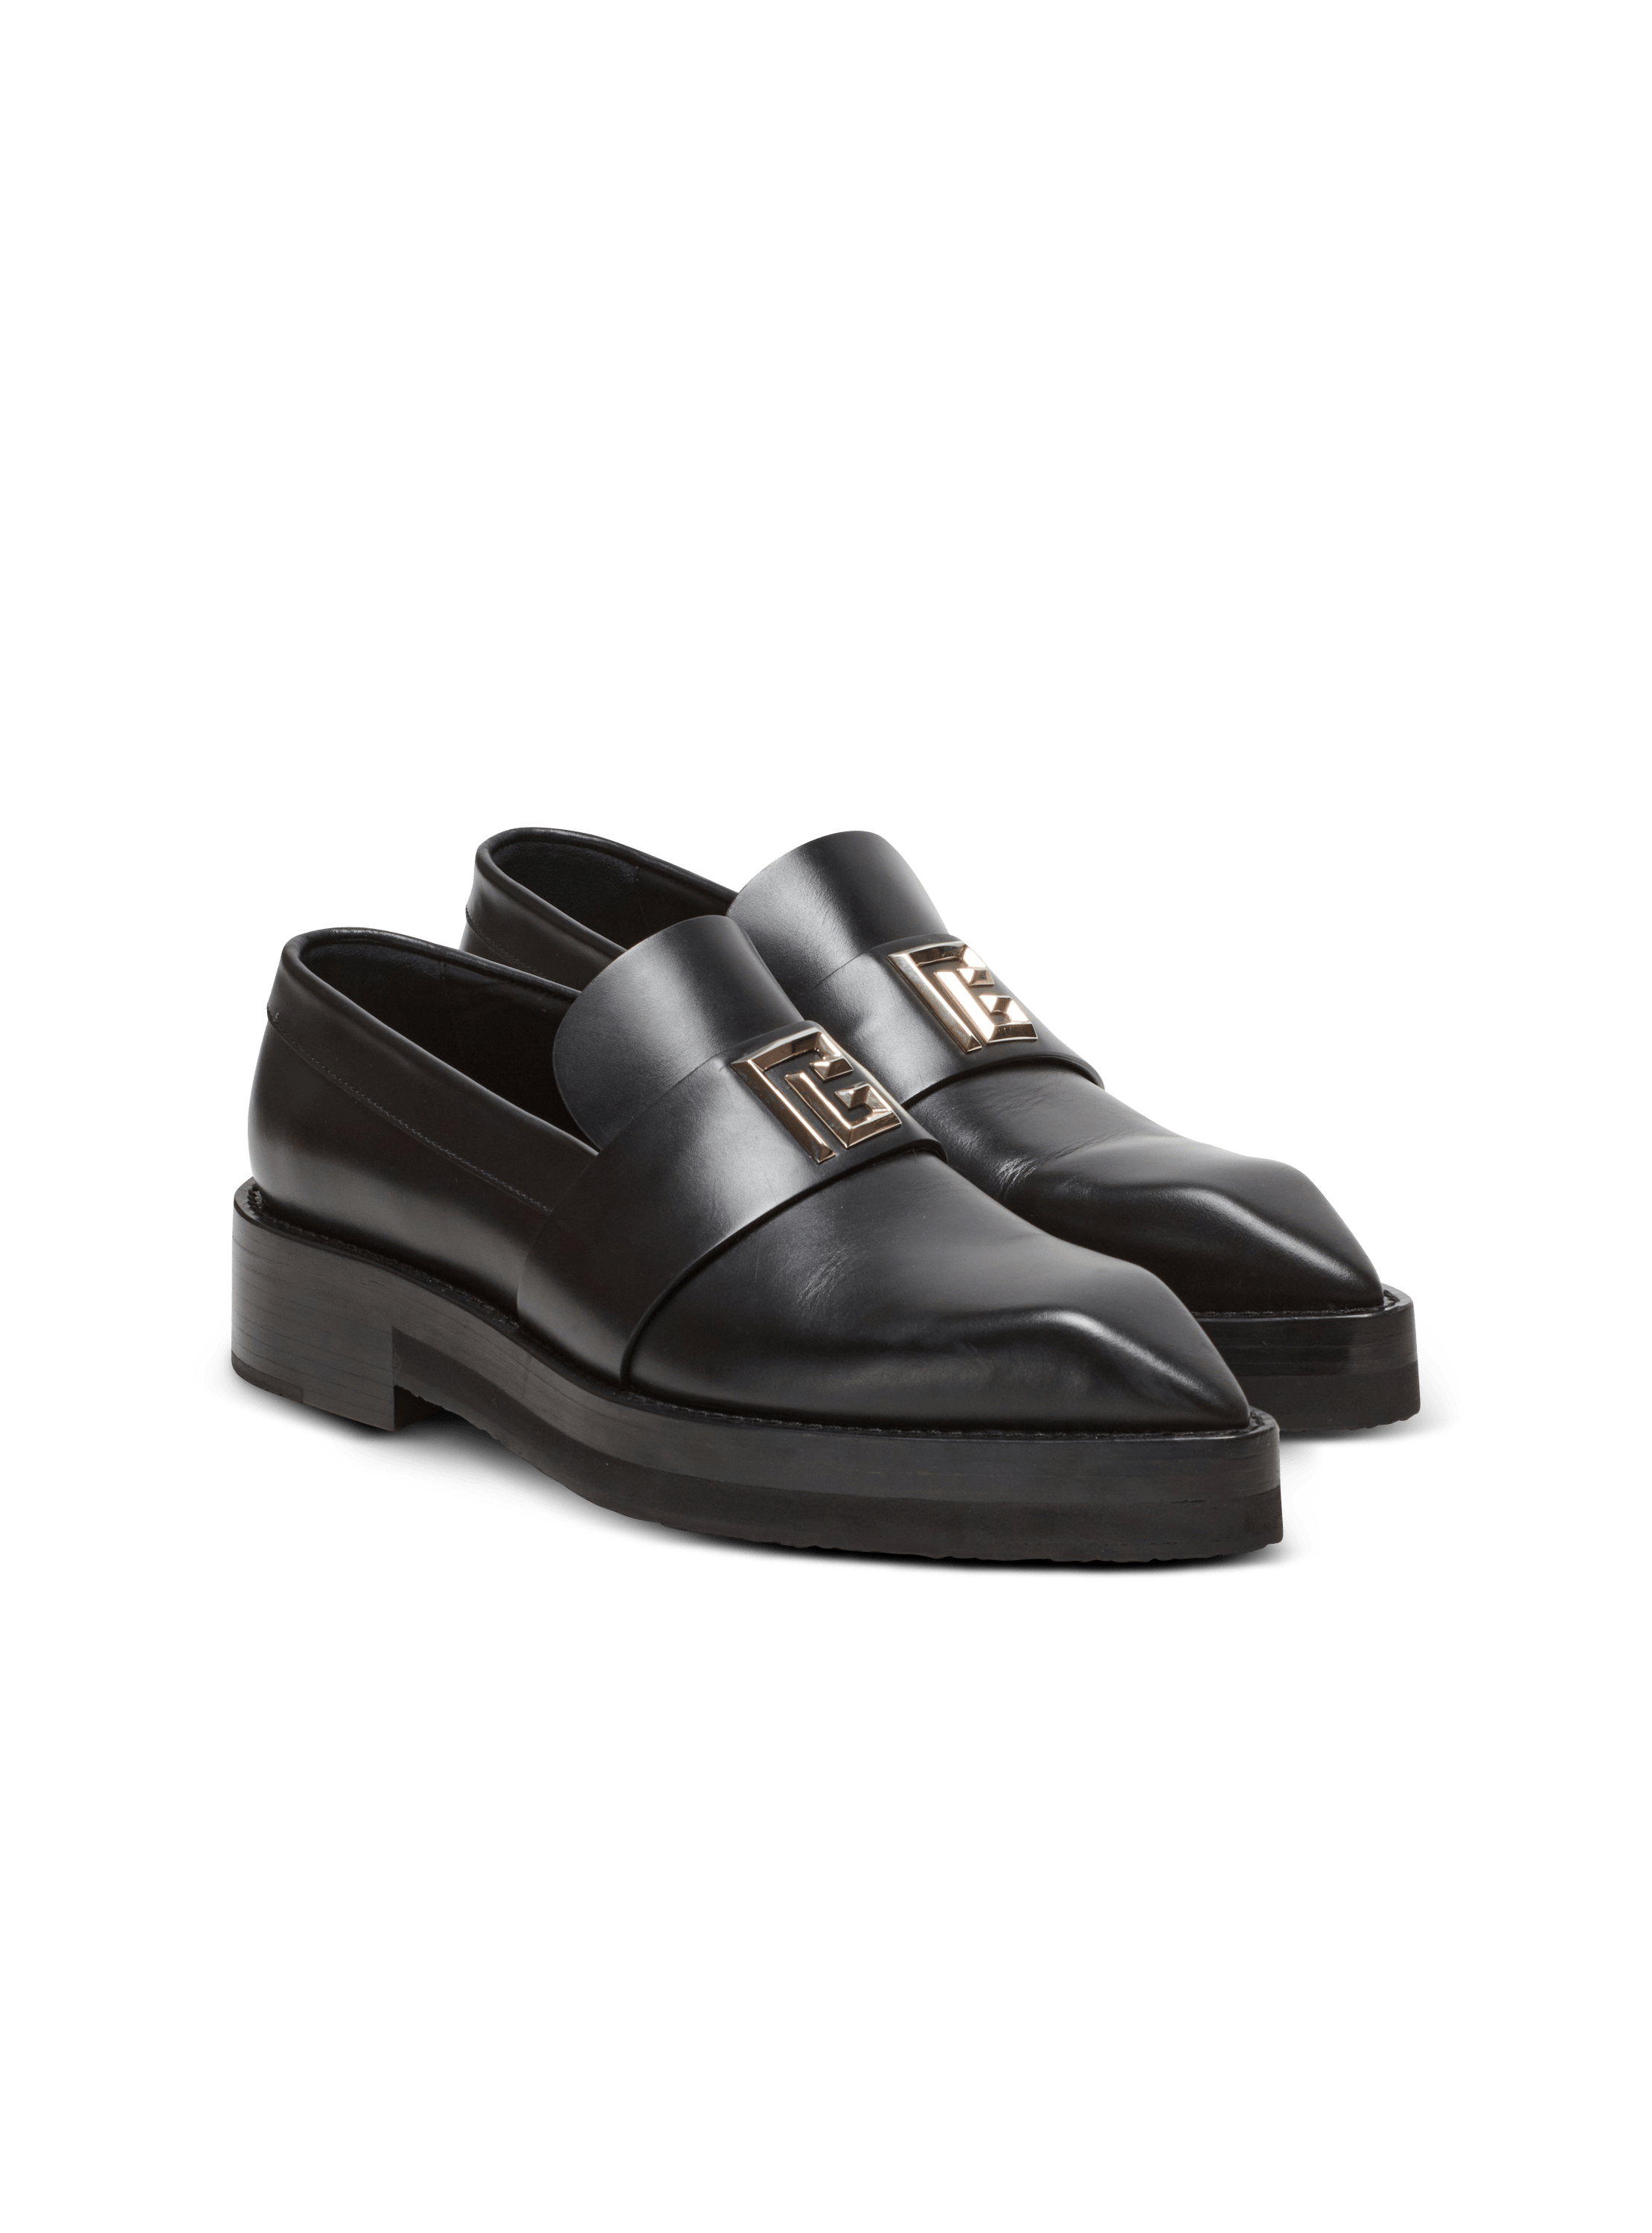 Ben smooth leather loafers